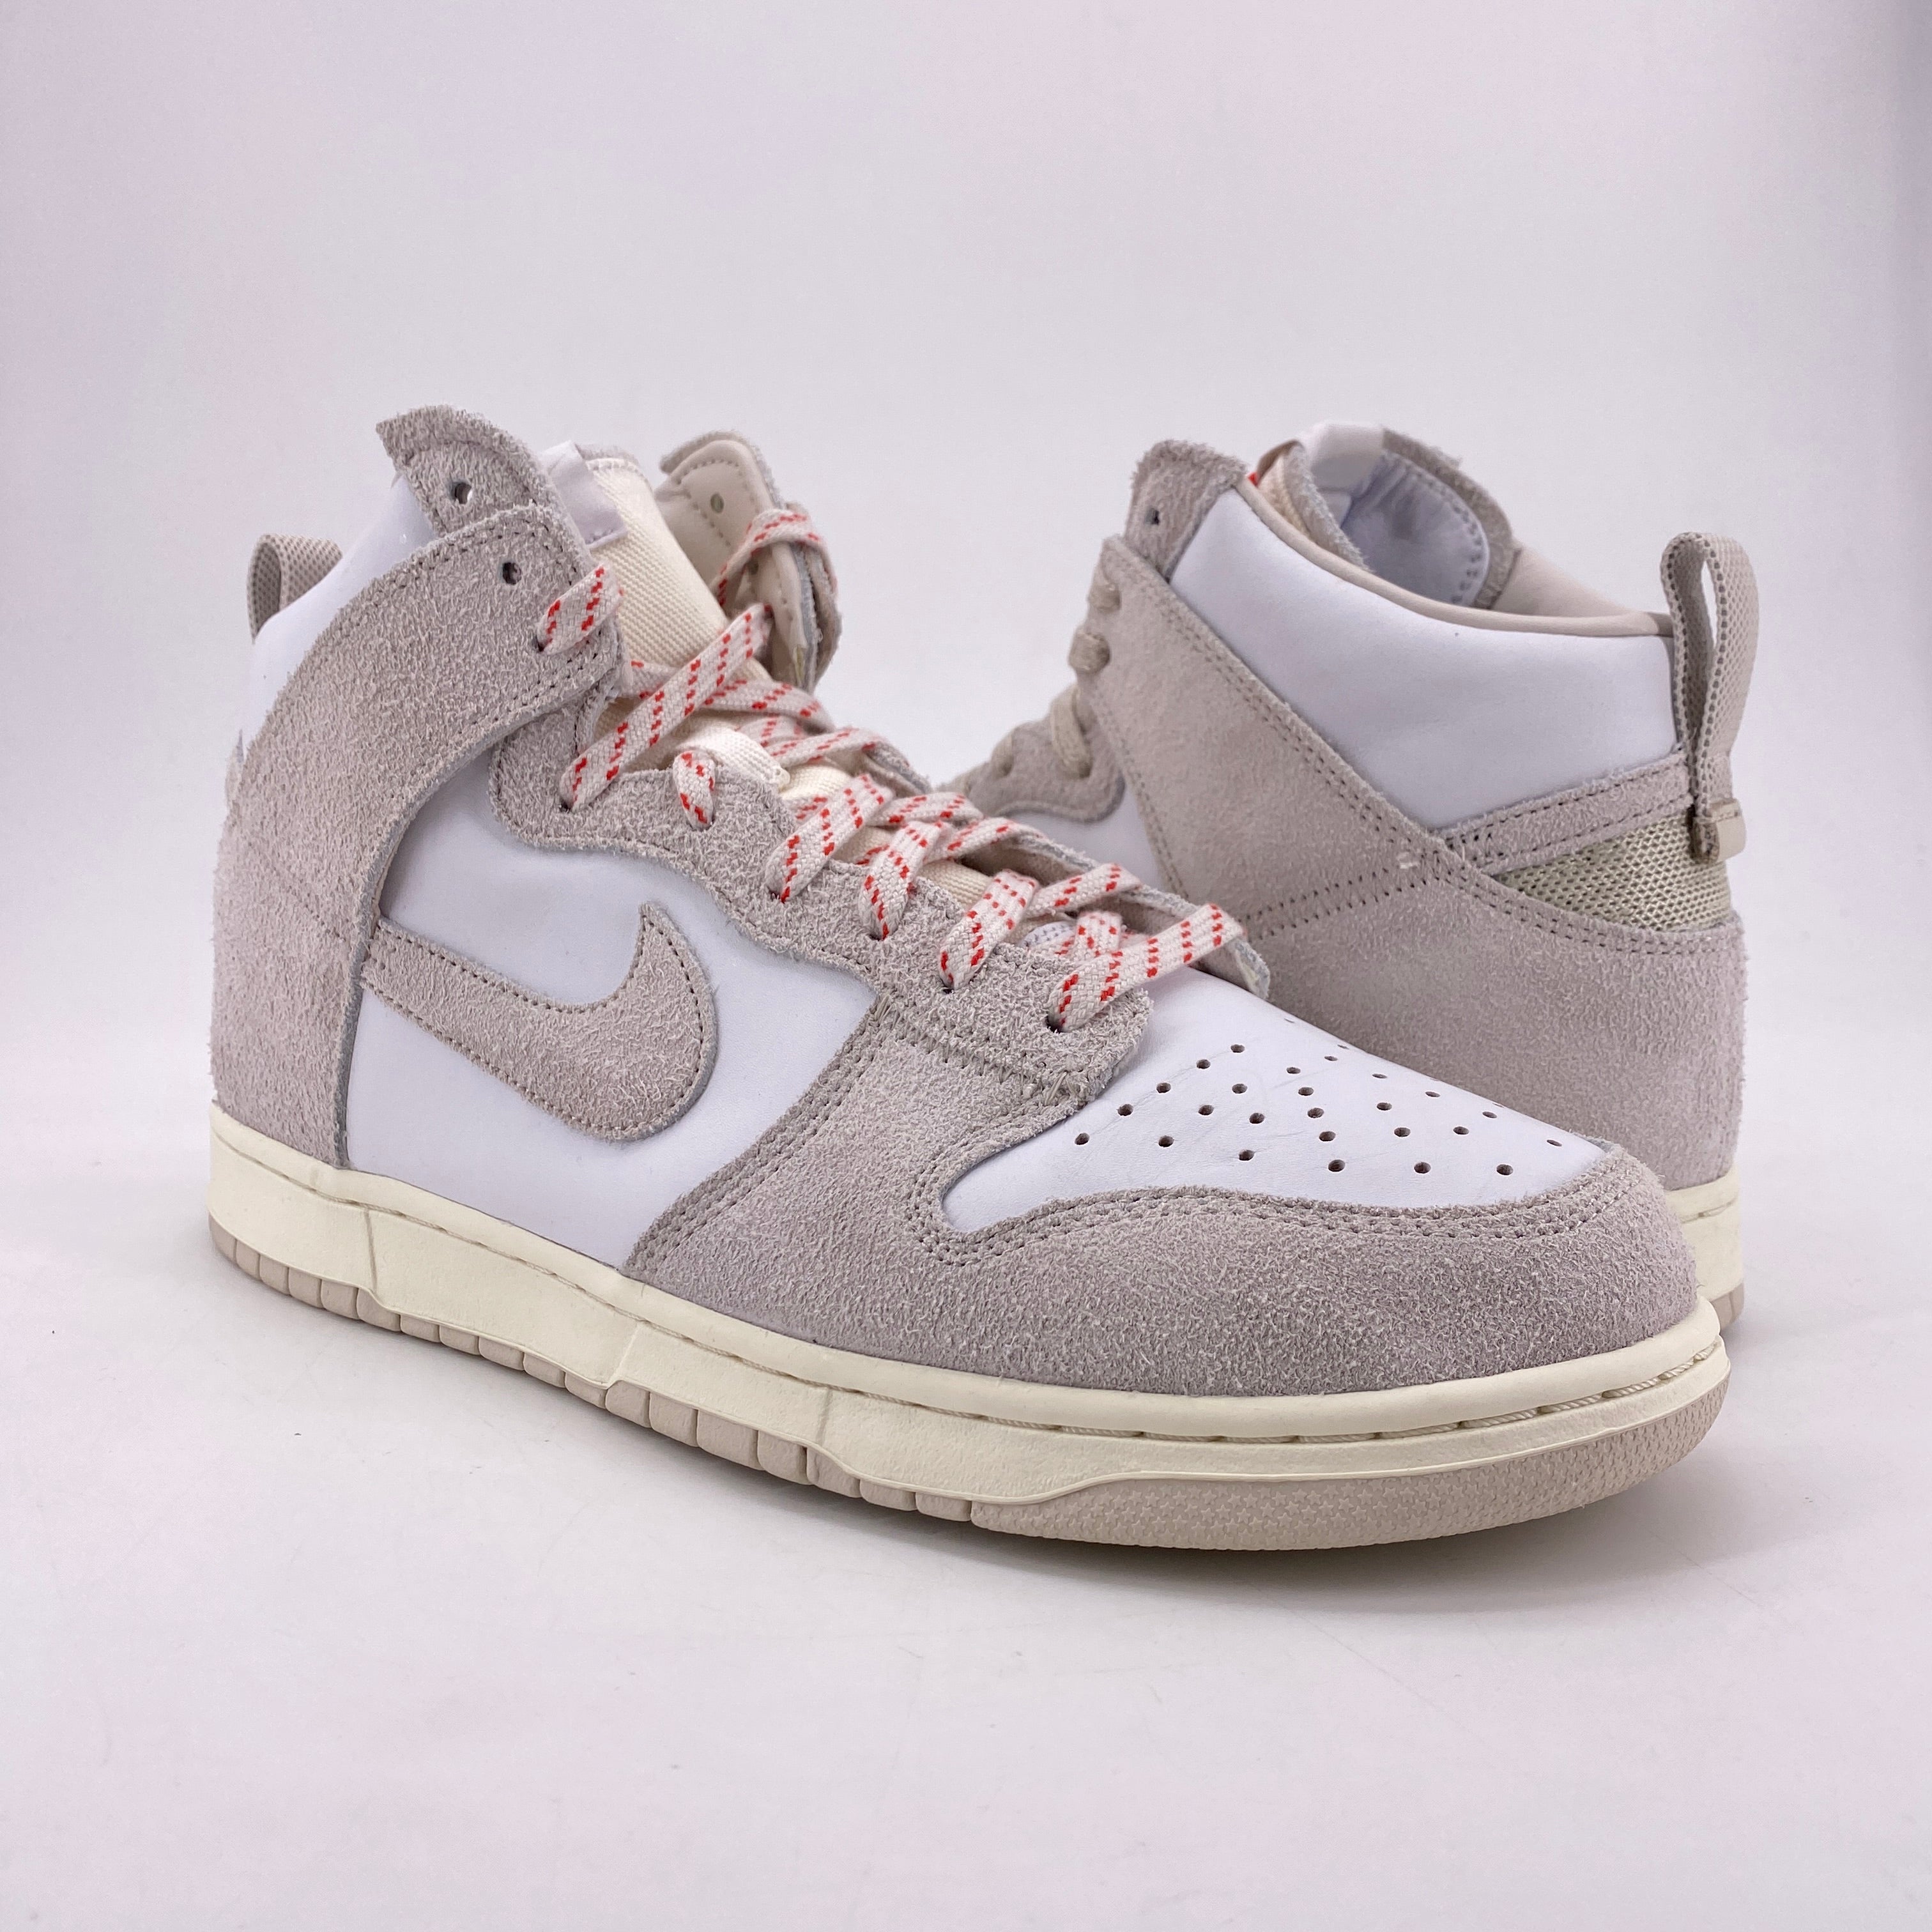 Nike Dunk High &quot;Notre Light Orewood Brown&quot; 2021 Used Size 11.5